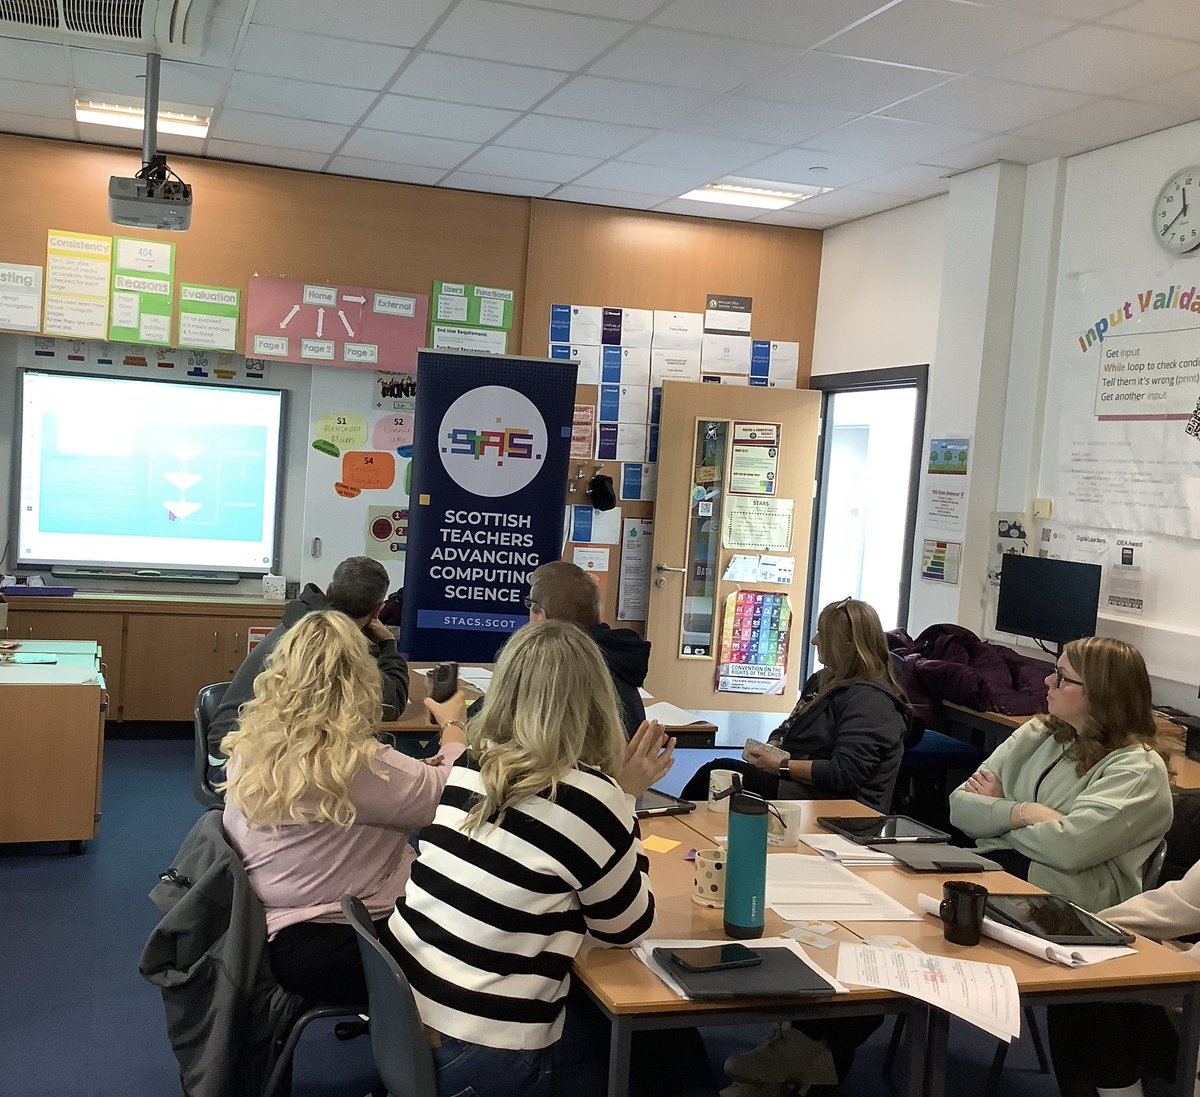 Our second workshop from @stacshq allowing us to explore the fantastic resources available on Databases and Web. So many great resources and advice shared across all our courses N5, Higher and Advanced Higher. Thank you so much 😍 #BestInsetDayEver #chooseComputingScience